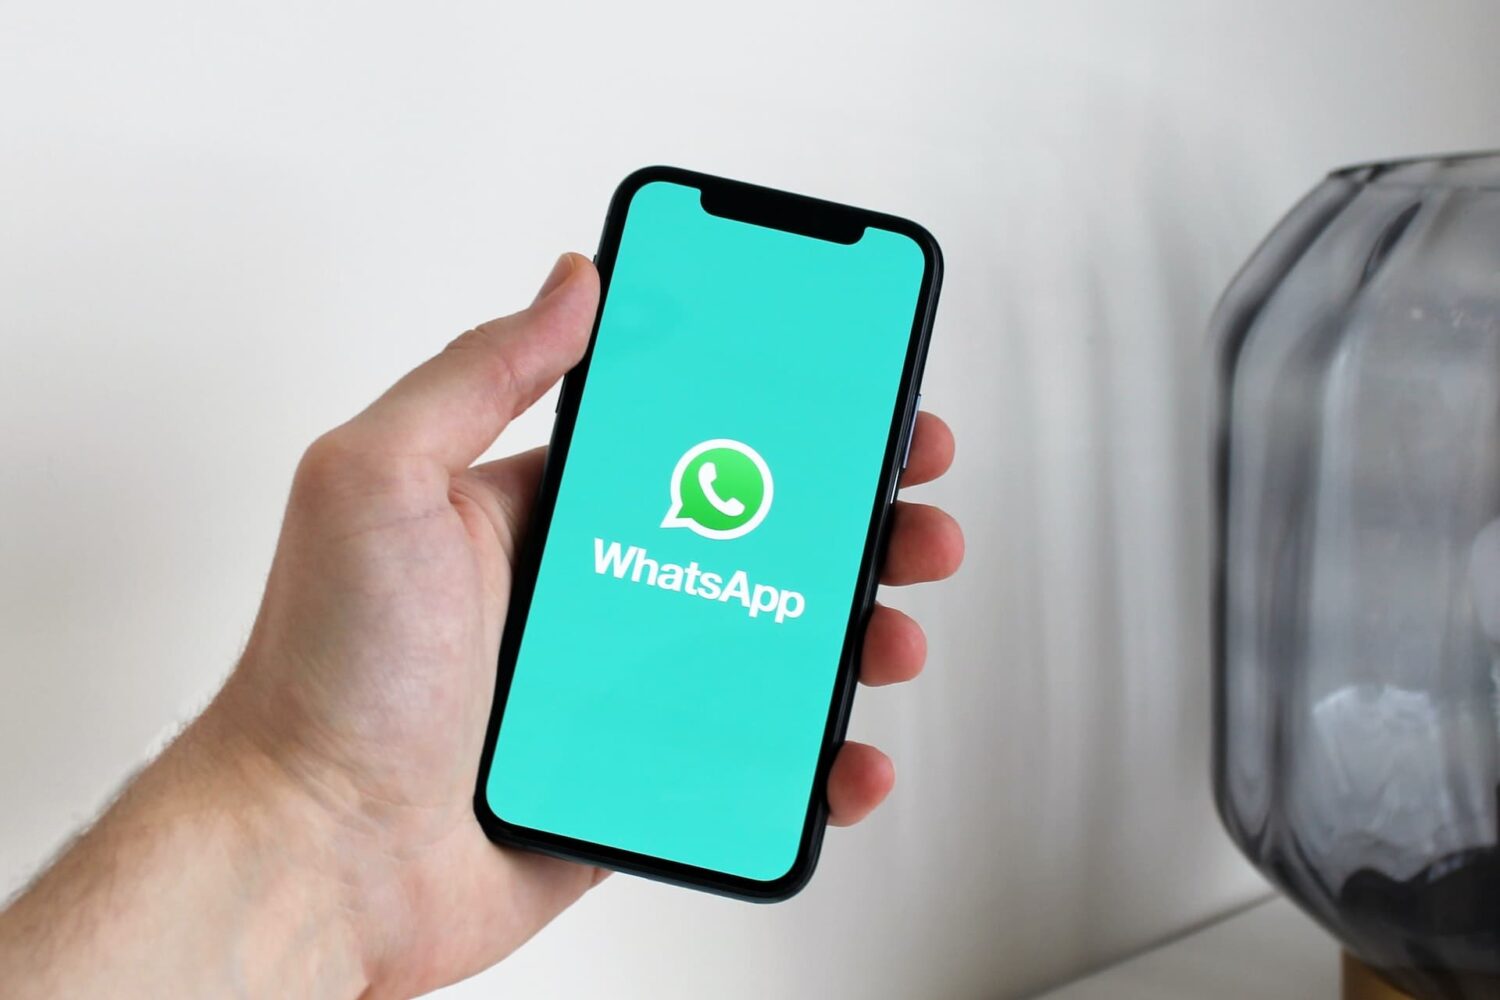 Holding iPhone in hand with WhatsApp logo on the screen